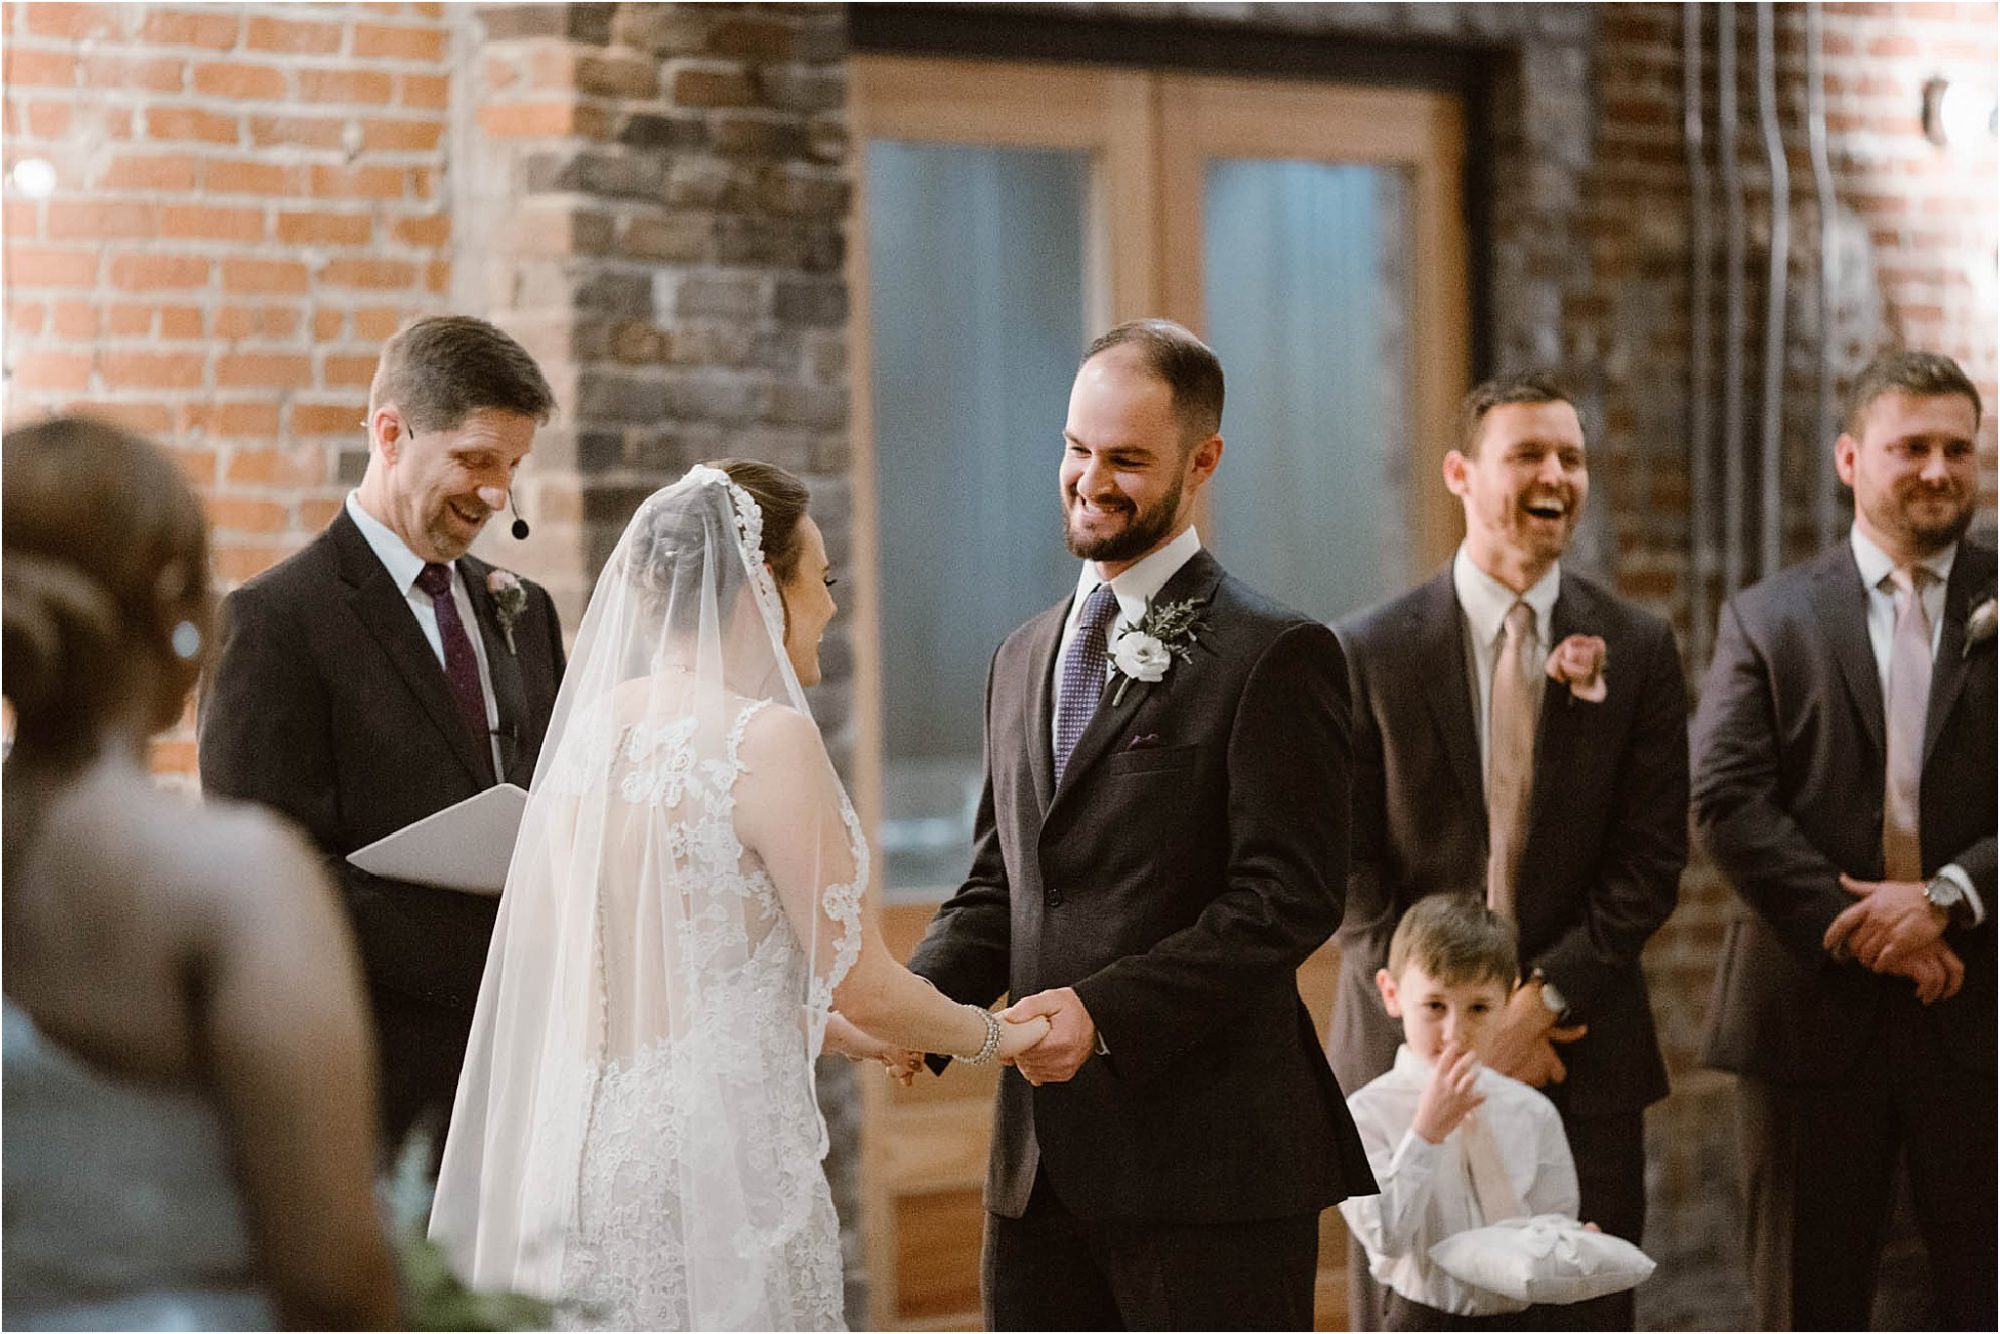 groom laughing during ceremony on wedding day